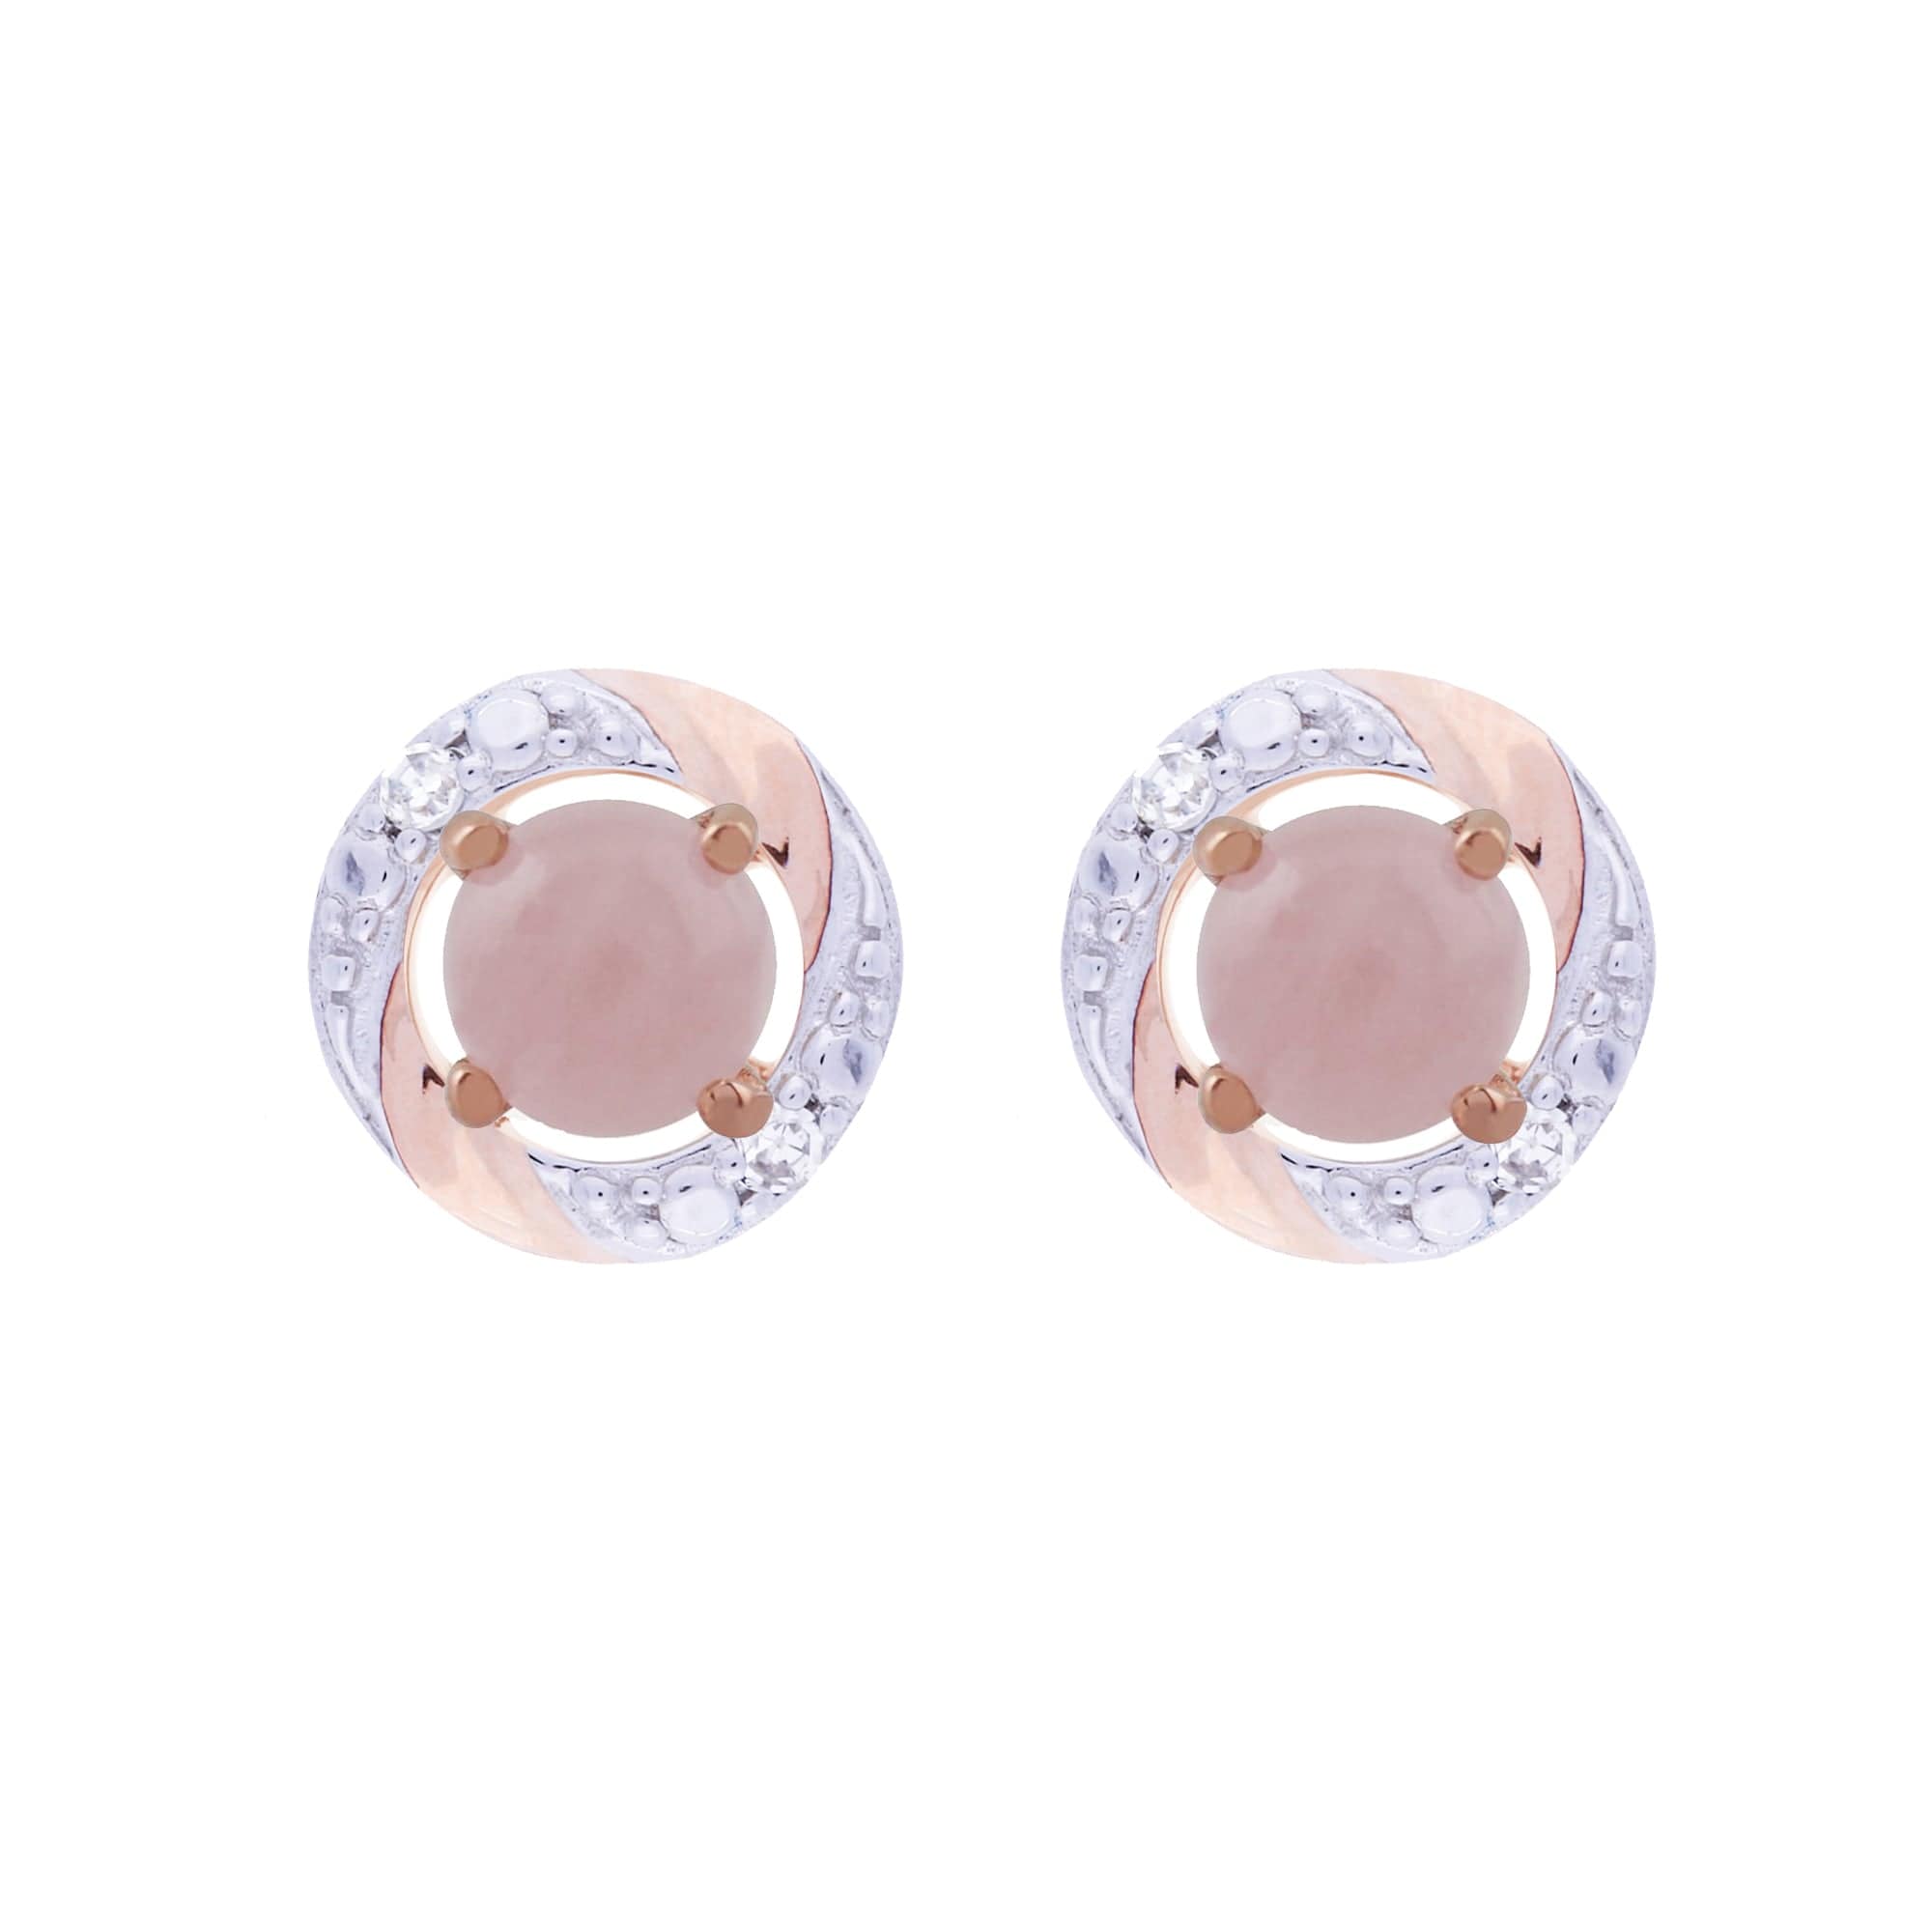 183E4316049-191E0378019 Classic Round Rose Quartz Stud Earrings with Detachable Diamond Round Earrings Jacket Set in 9ct Rose Gold 1